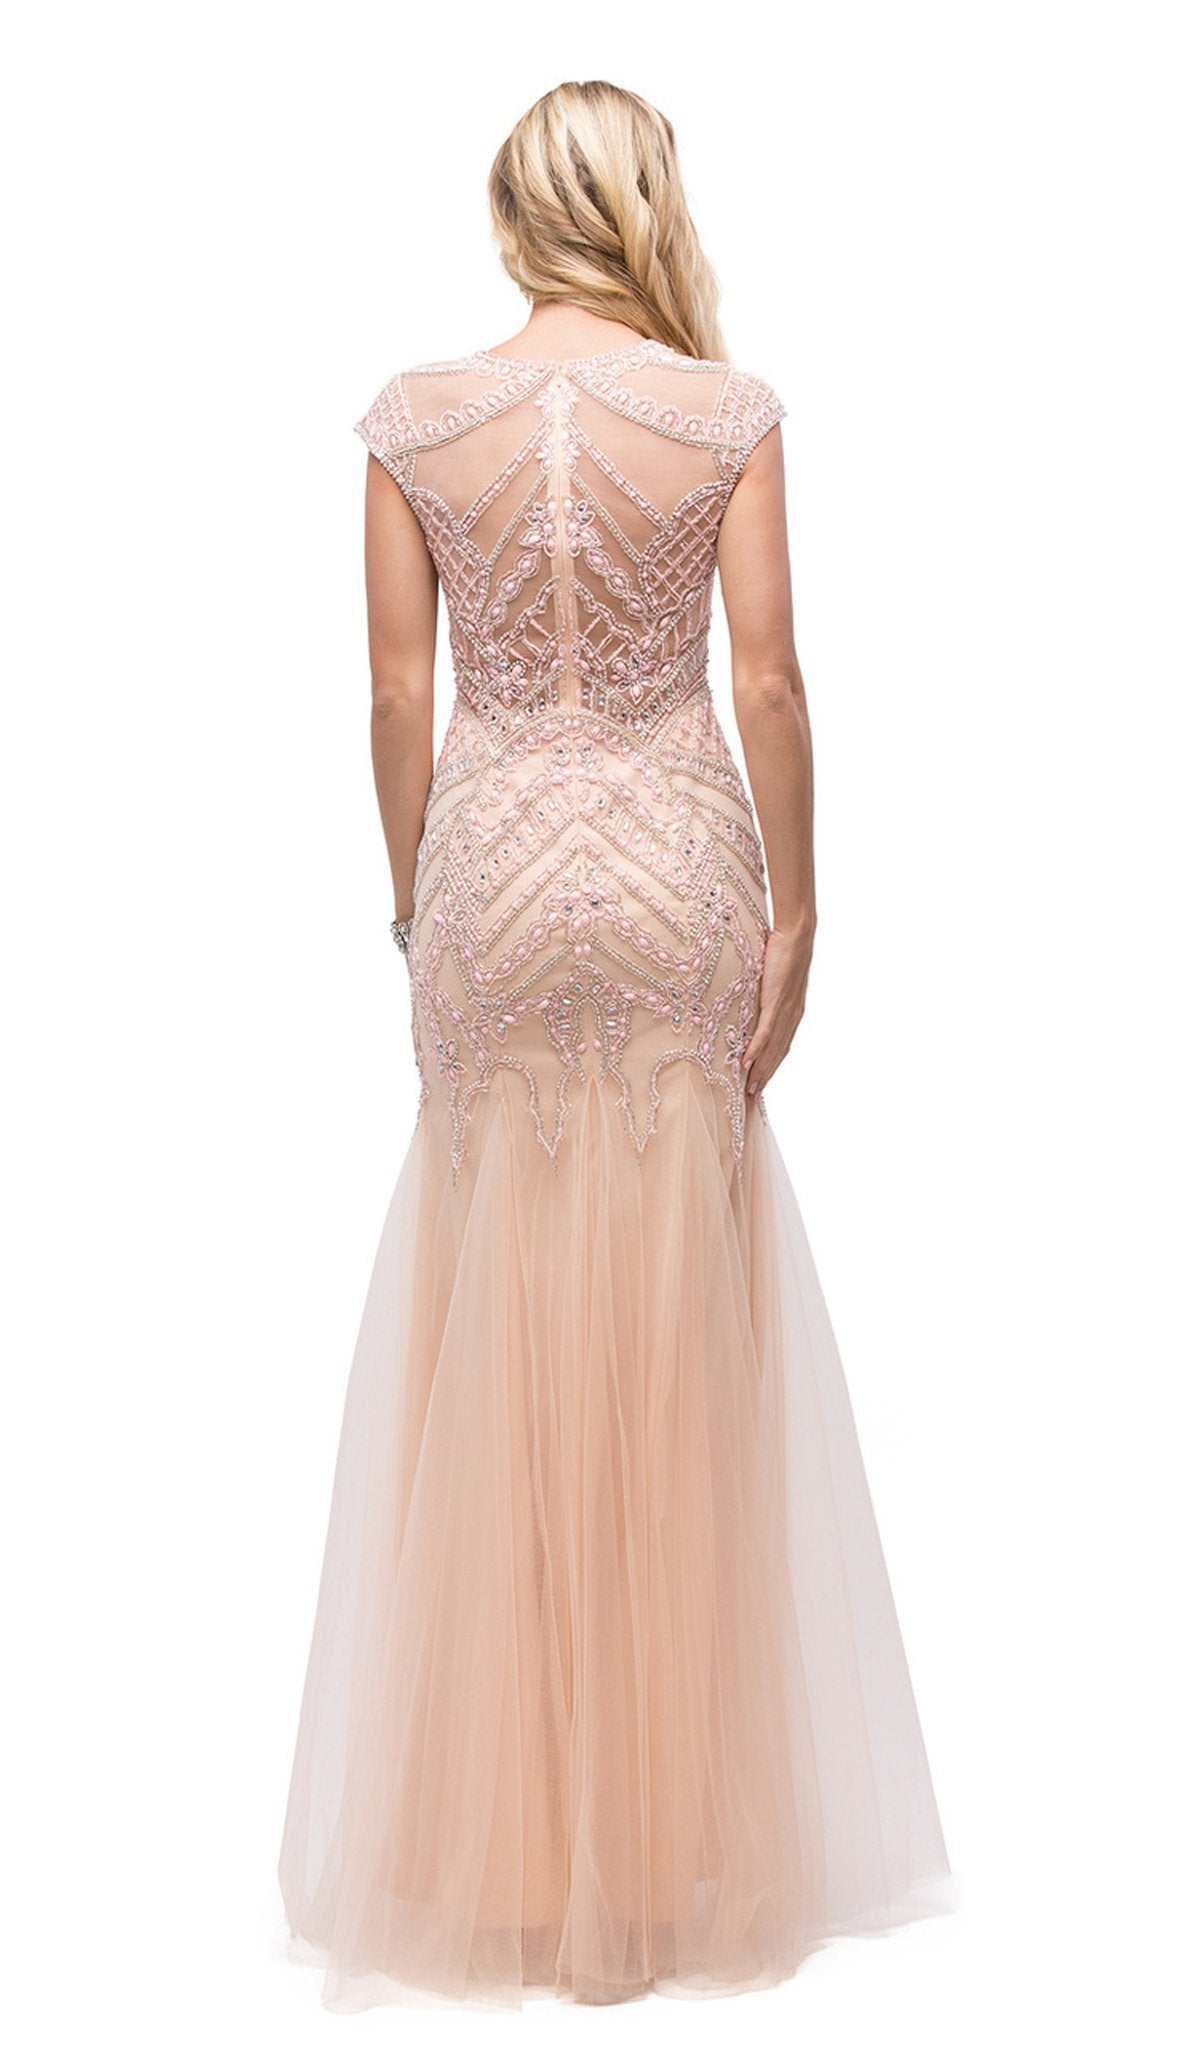 Dancing Queen - 9734 Lace Beaded Ornate Mermaid Dress Special Occasion Dress M / Blush